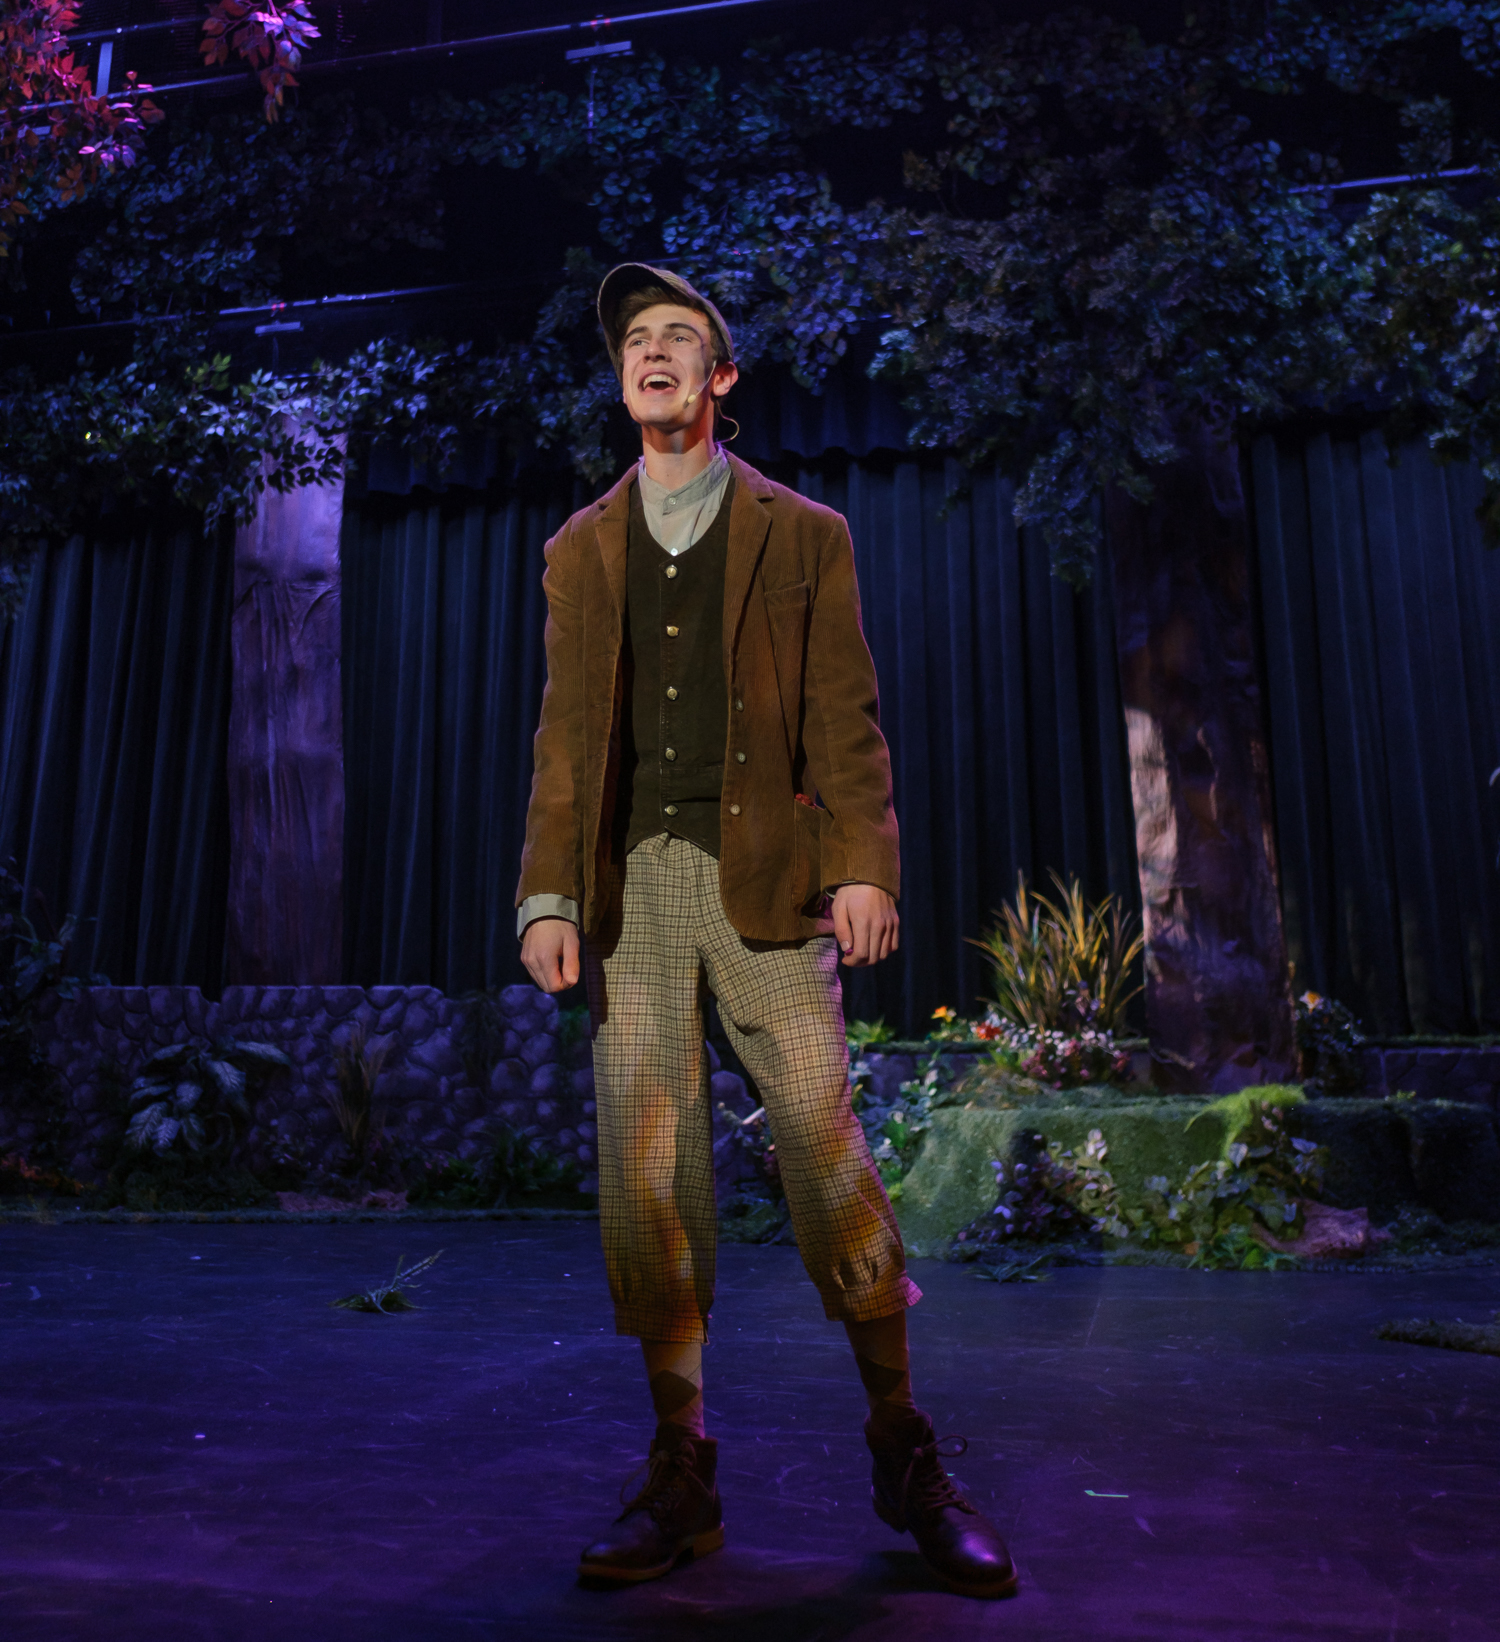 Students Perform Into The Woods at Skaneateles High School